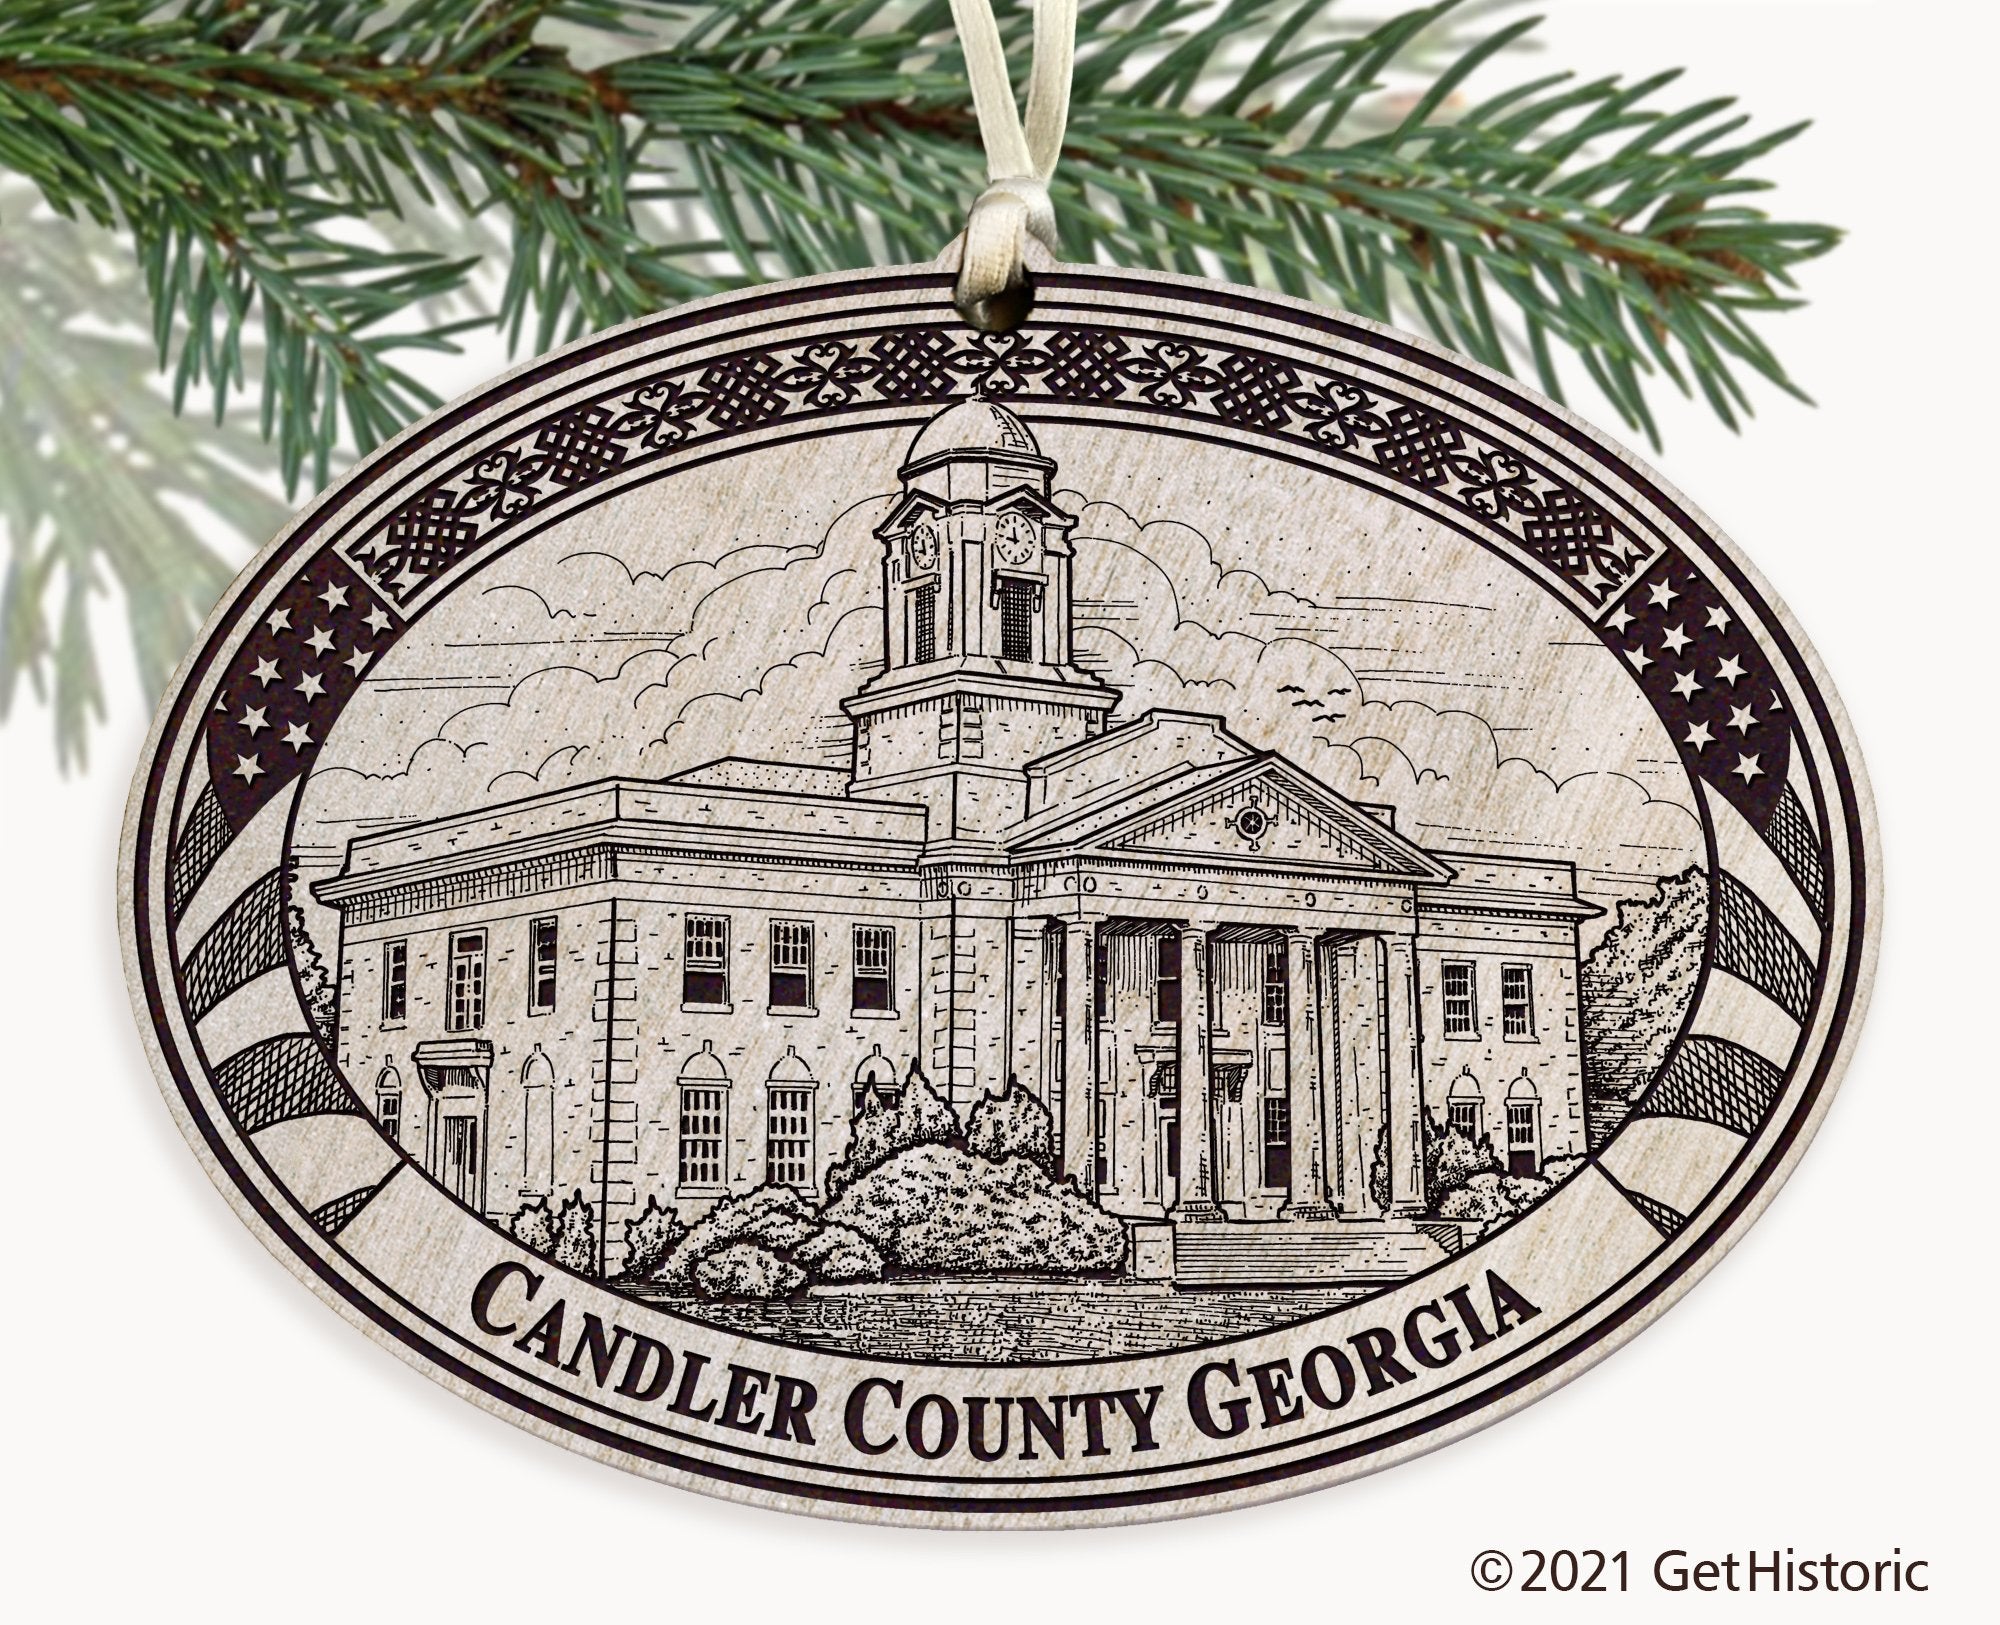 Candler County Georgia Engraved Ornament